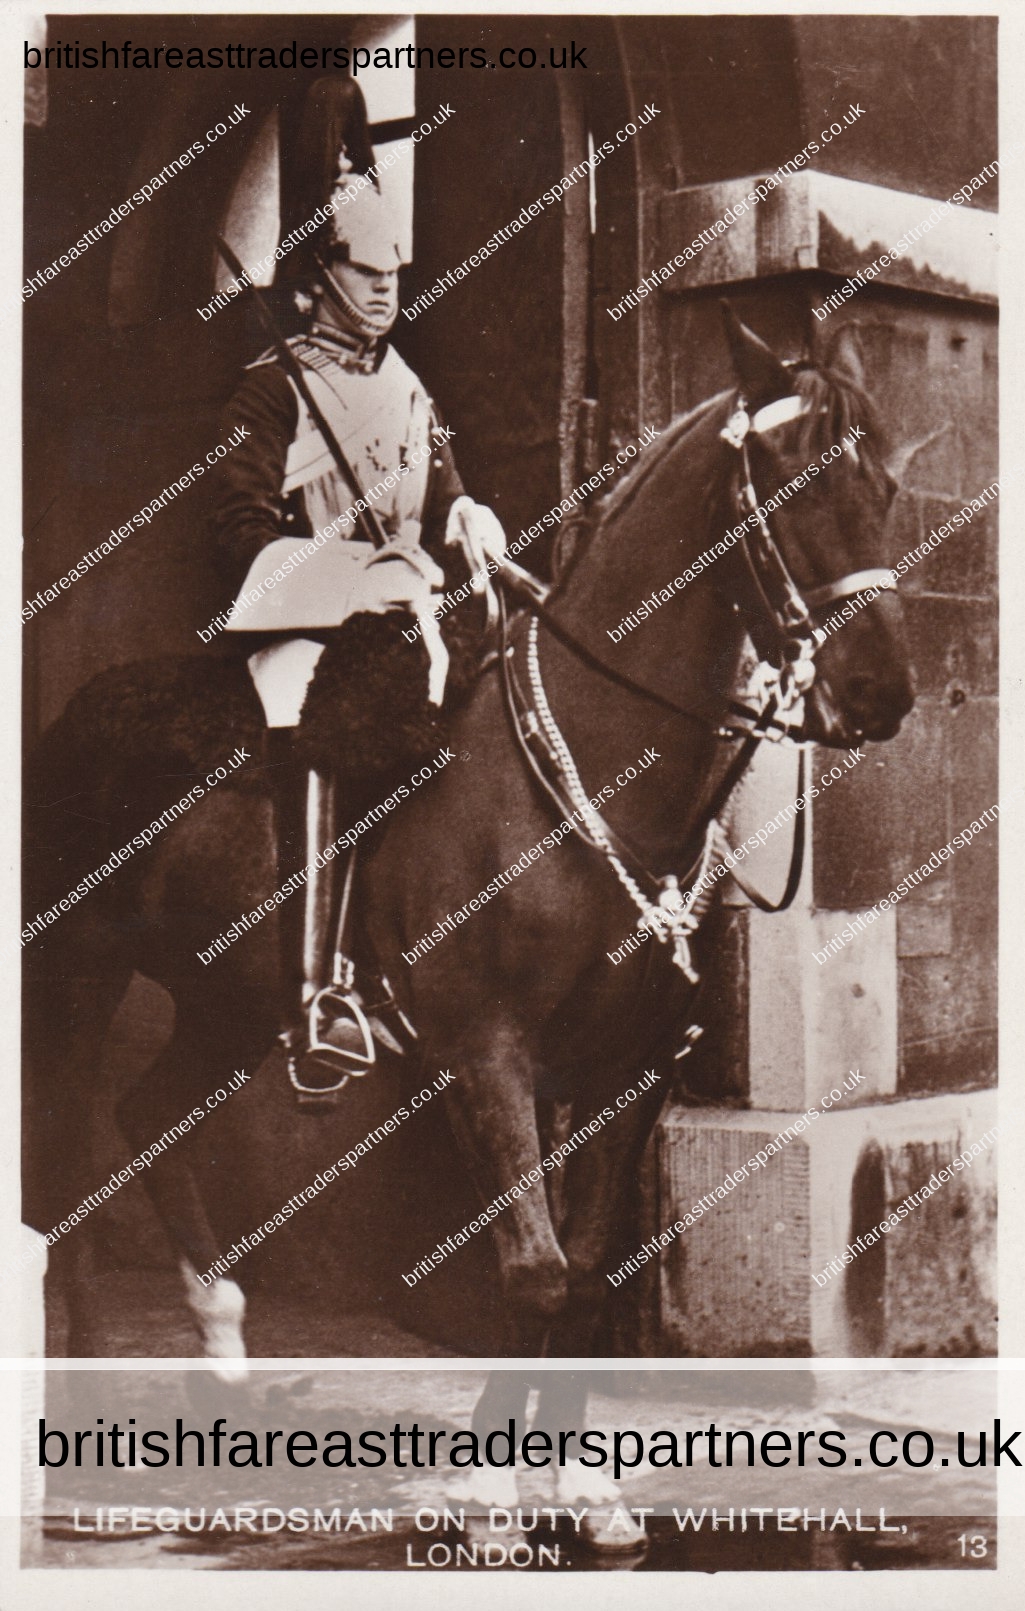 VINTAGE REAL PHOTO POSTCARD (RPPC) “LIFE GUARDSMAN ON DUTY AT WHITEHALL, LONDON” LONDON | ENGLAND | UNITED KINGDOM BRITISH | LONDON LIFE | SOCIETY | SOCIAL HISTORY | HORSE GUARDS | HORSES | PAGEANTRY FASHION | CULTURE | HERITAGE | LIFESTYLE